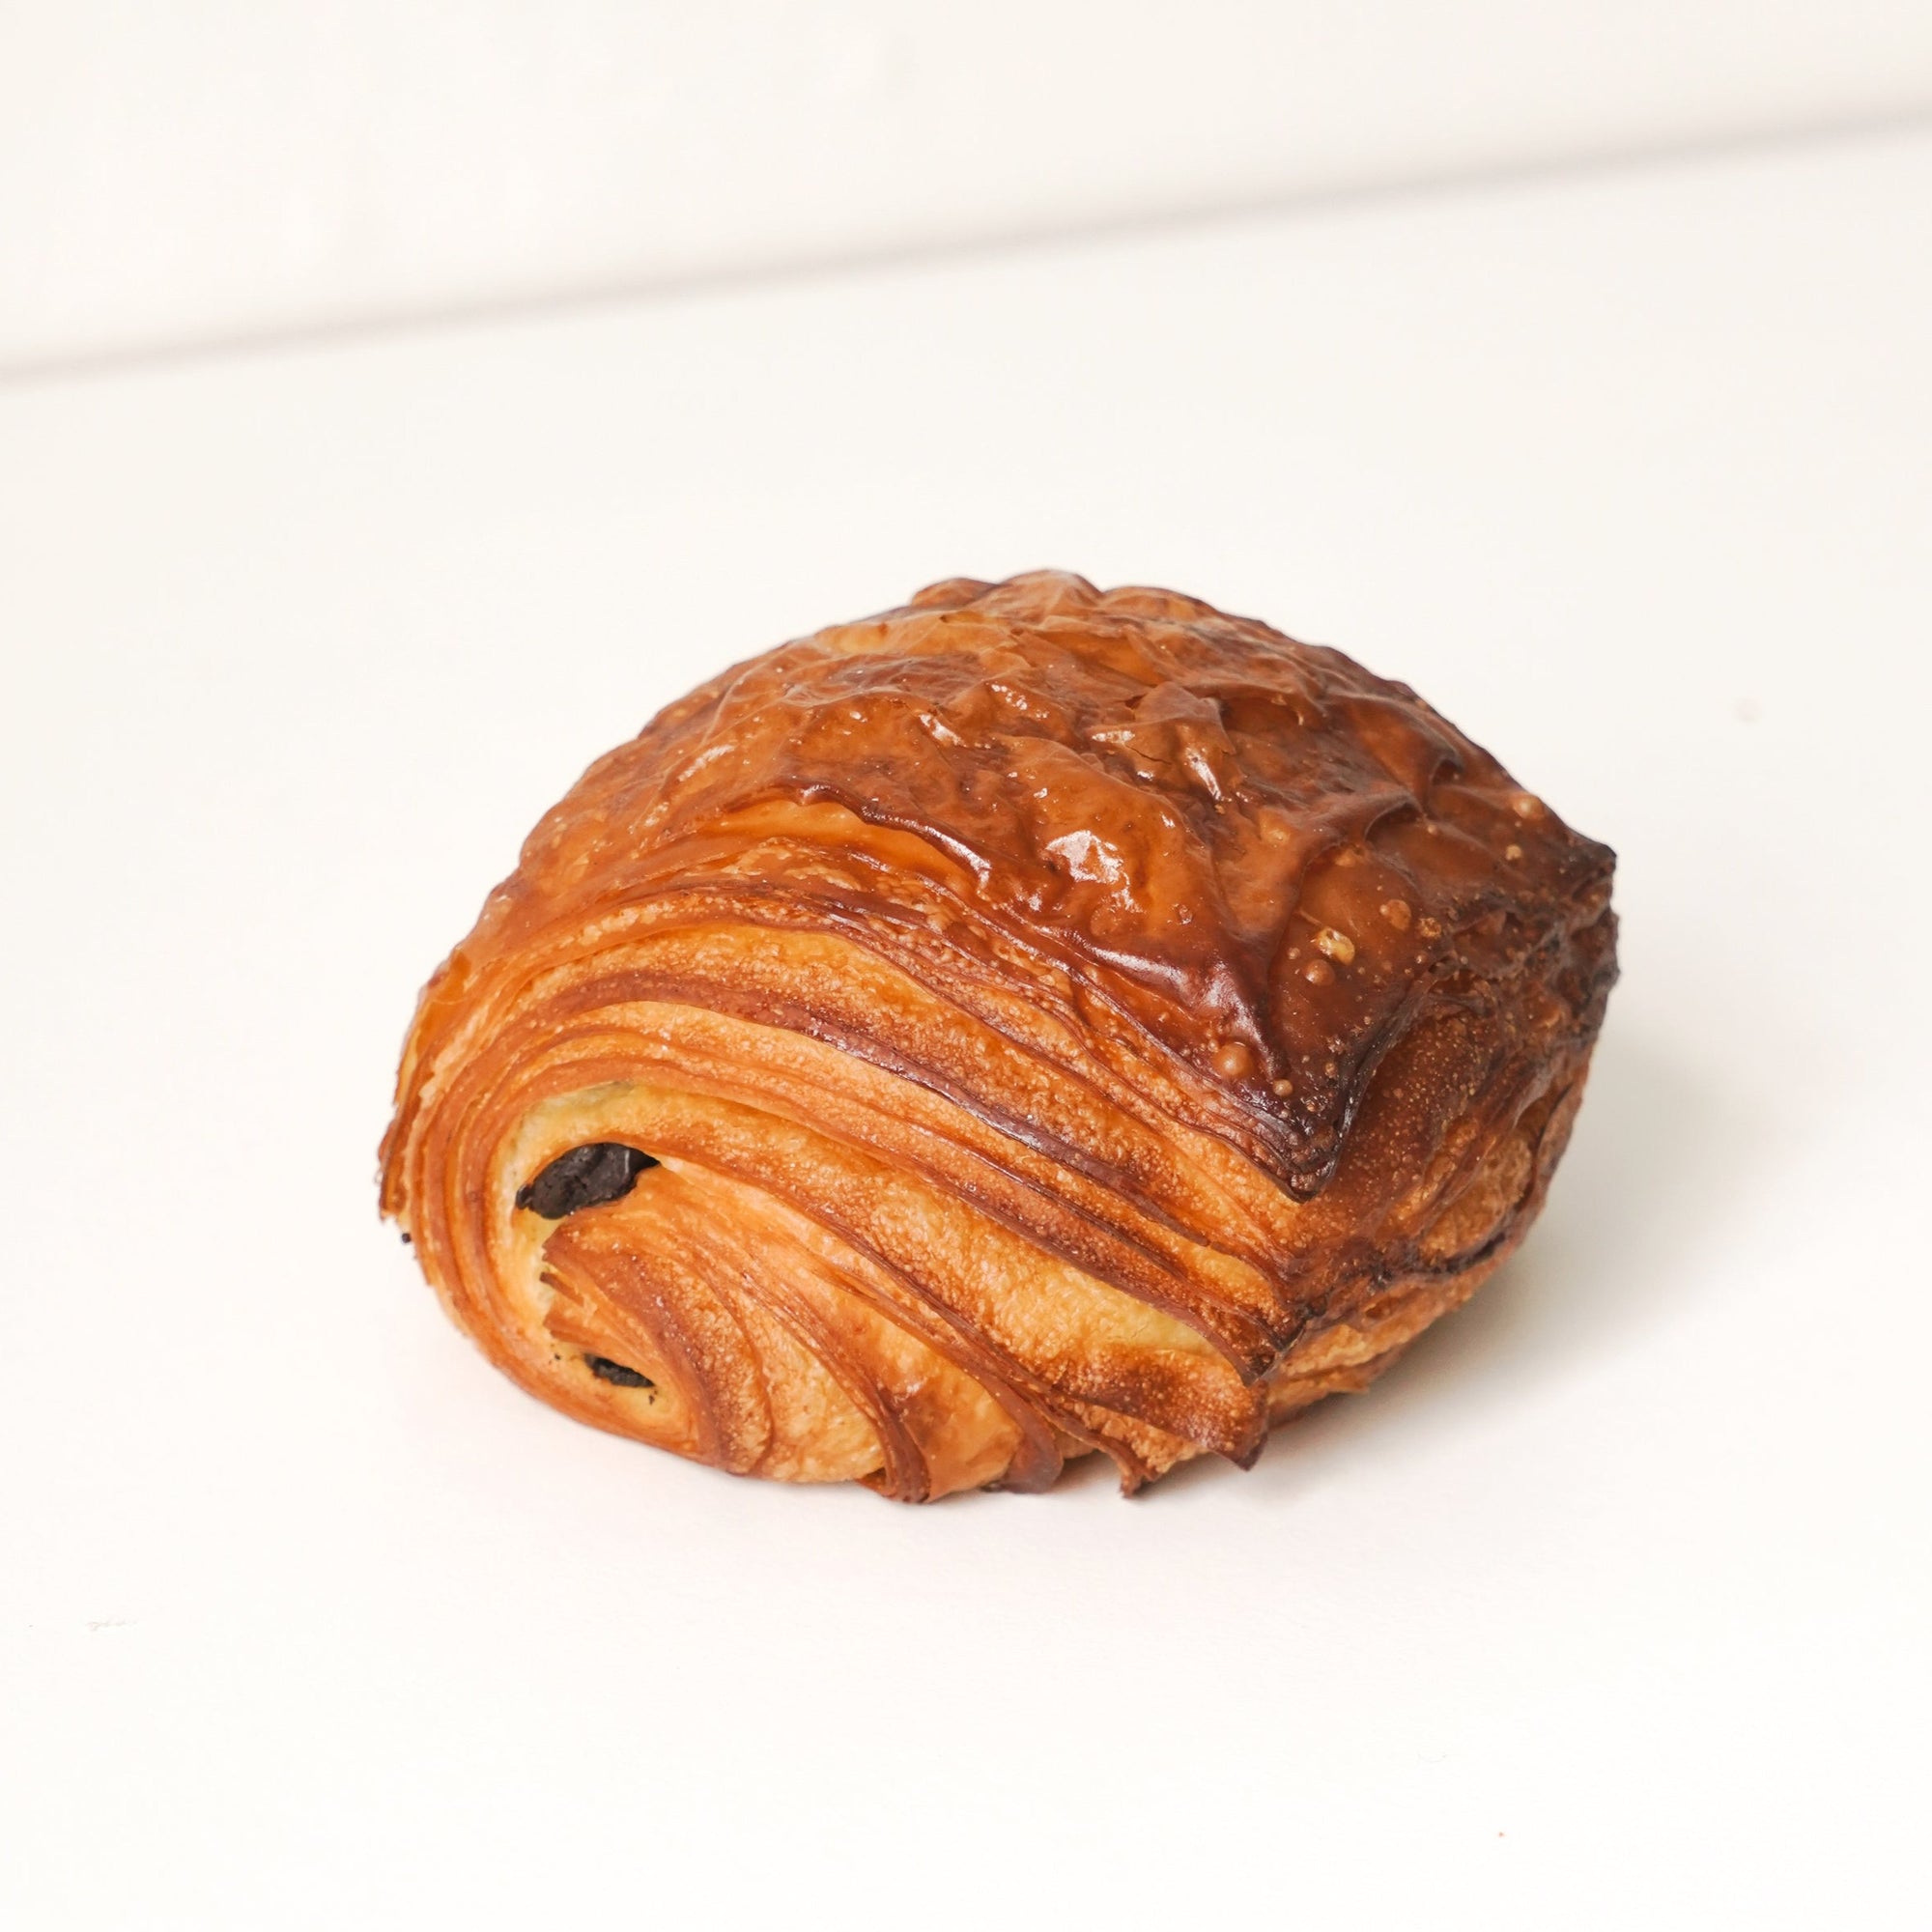 image of a layered pastry. the pastry is golden brown and has a layer of chocolate through the middle